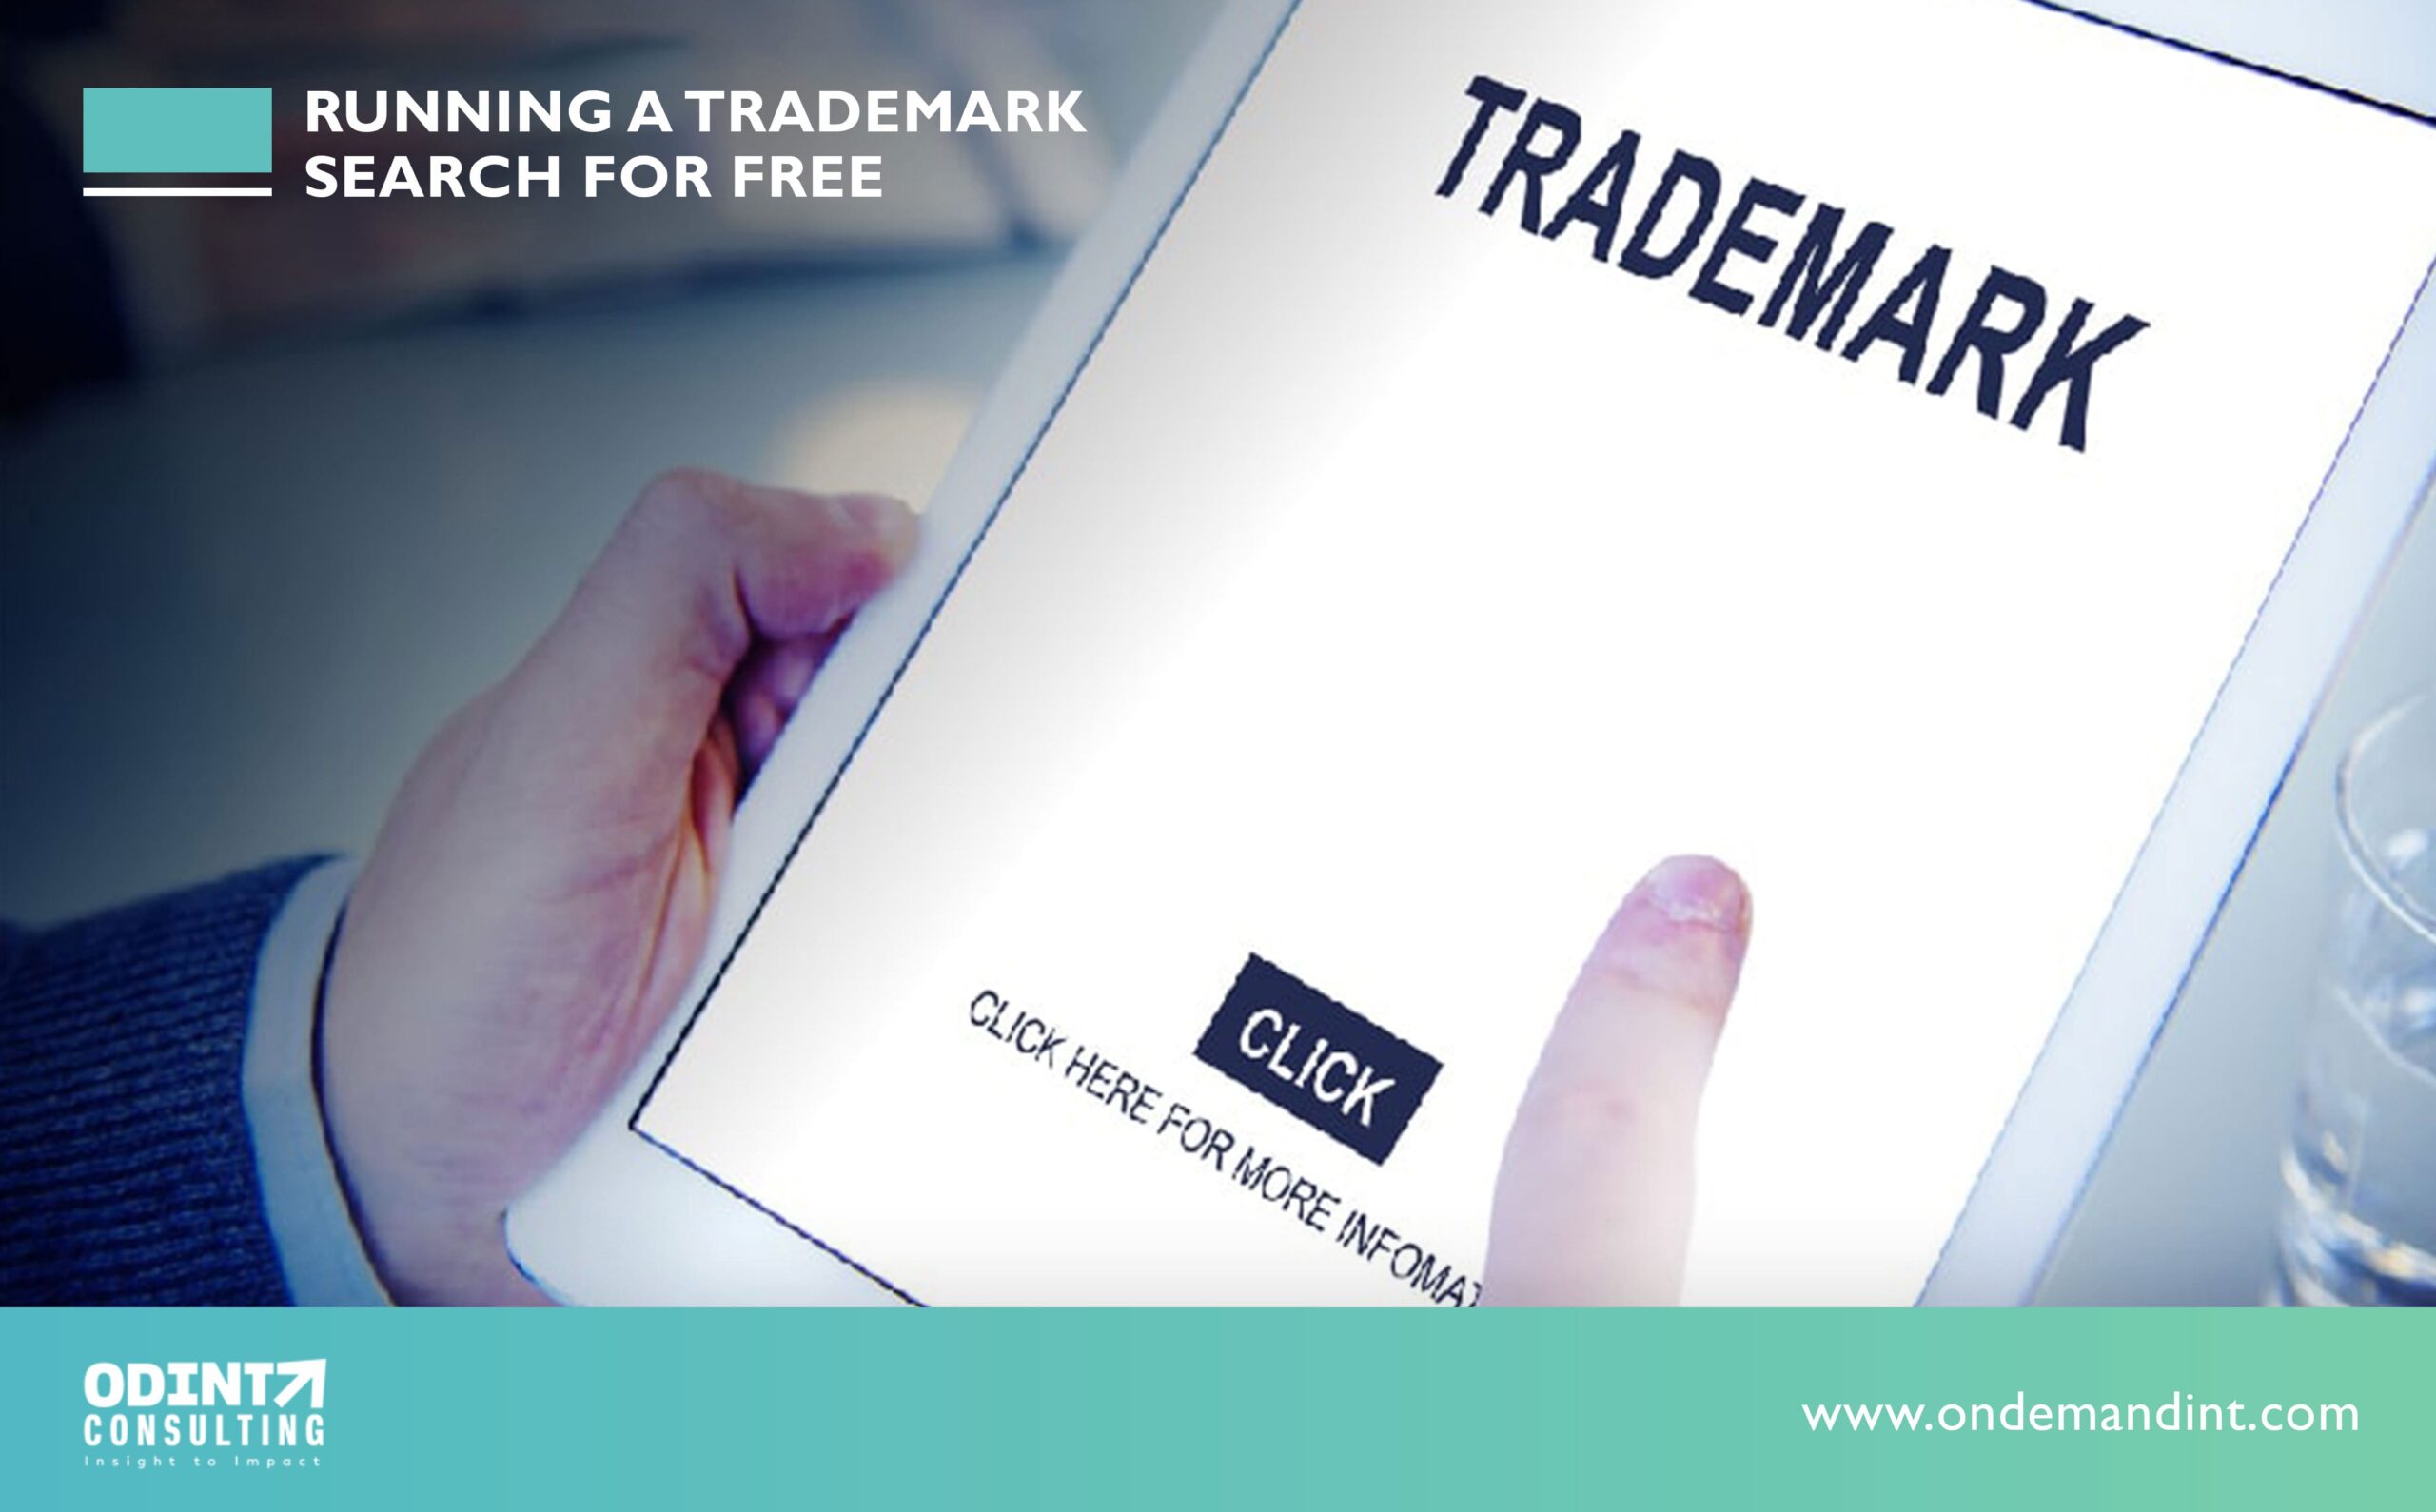 Running a Trademark Search for Free in 3 steps: General Overview